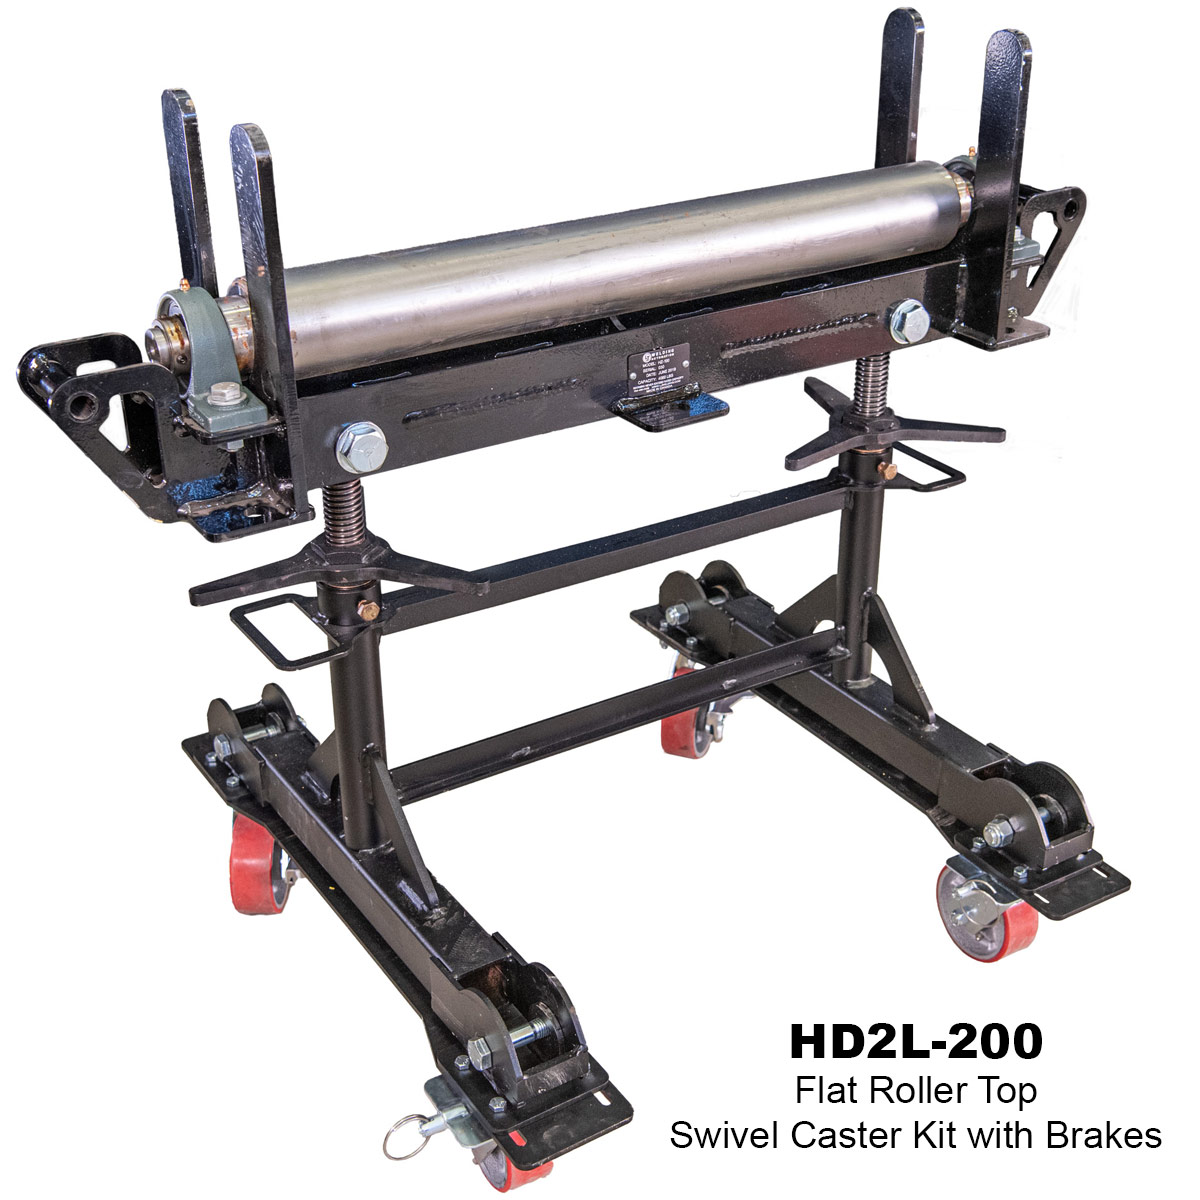 HD2L-200 industrial pipe stands